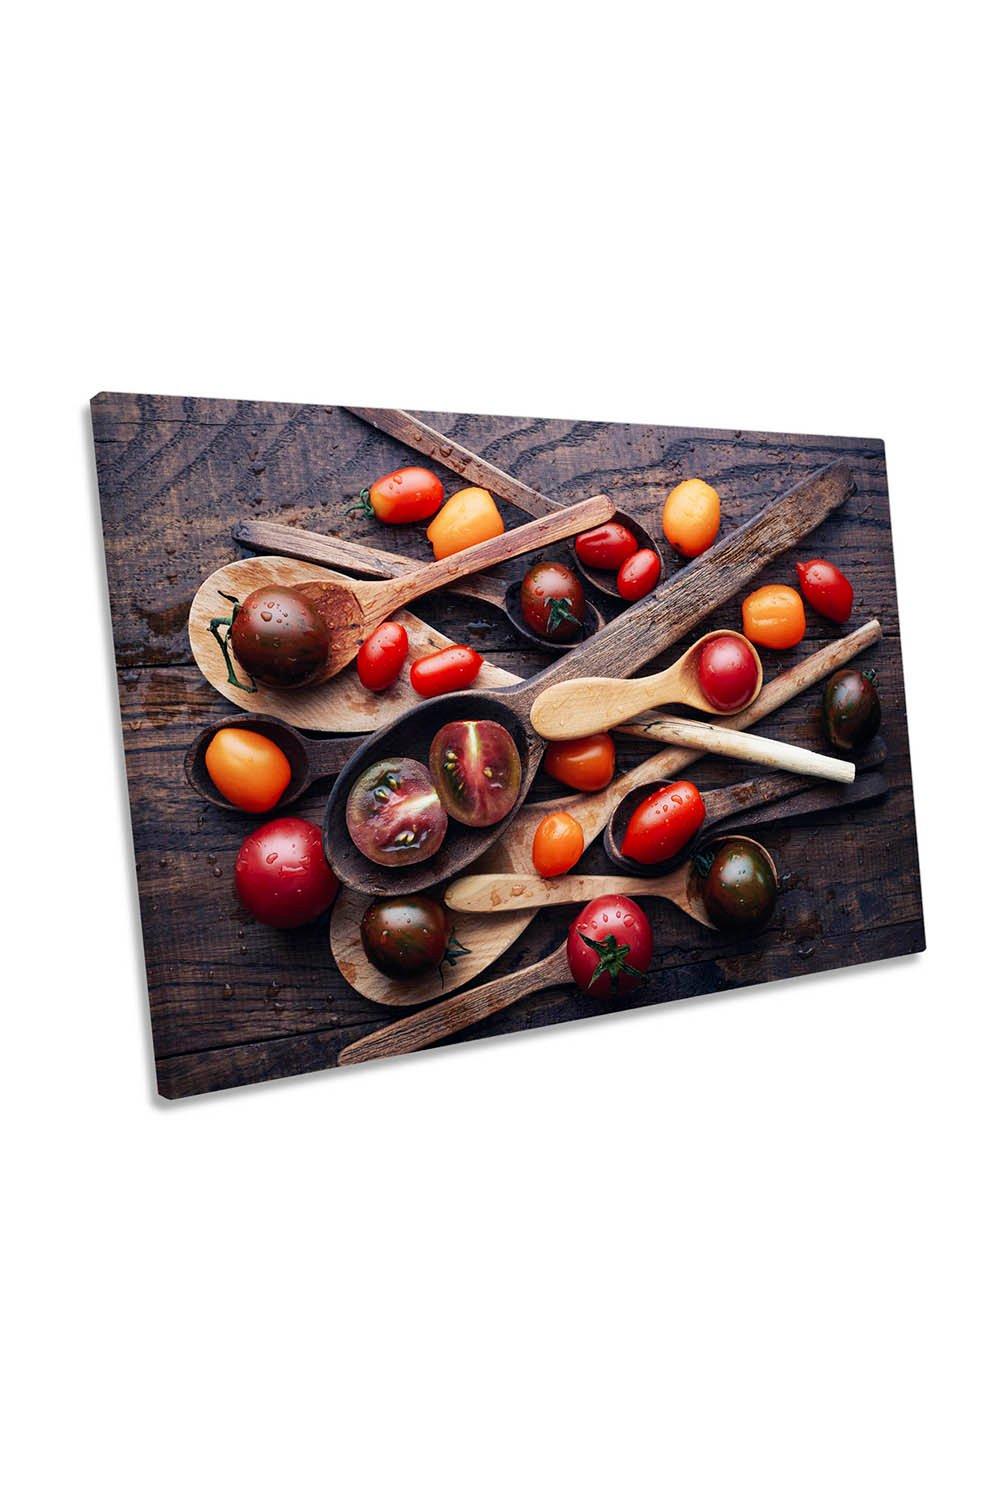 Spoons Tomatoes Kitchen Food Vegetables Canvas Wall Art Picture Print